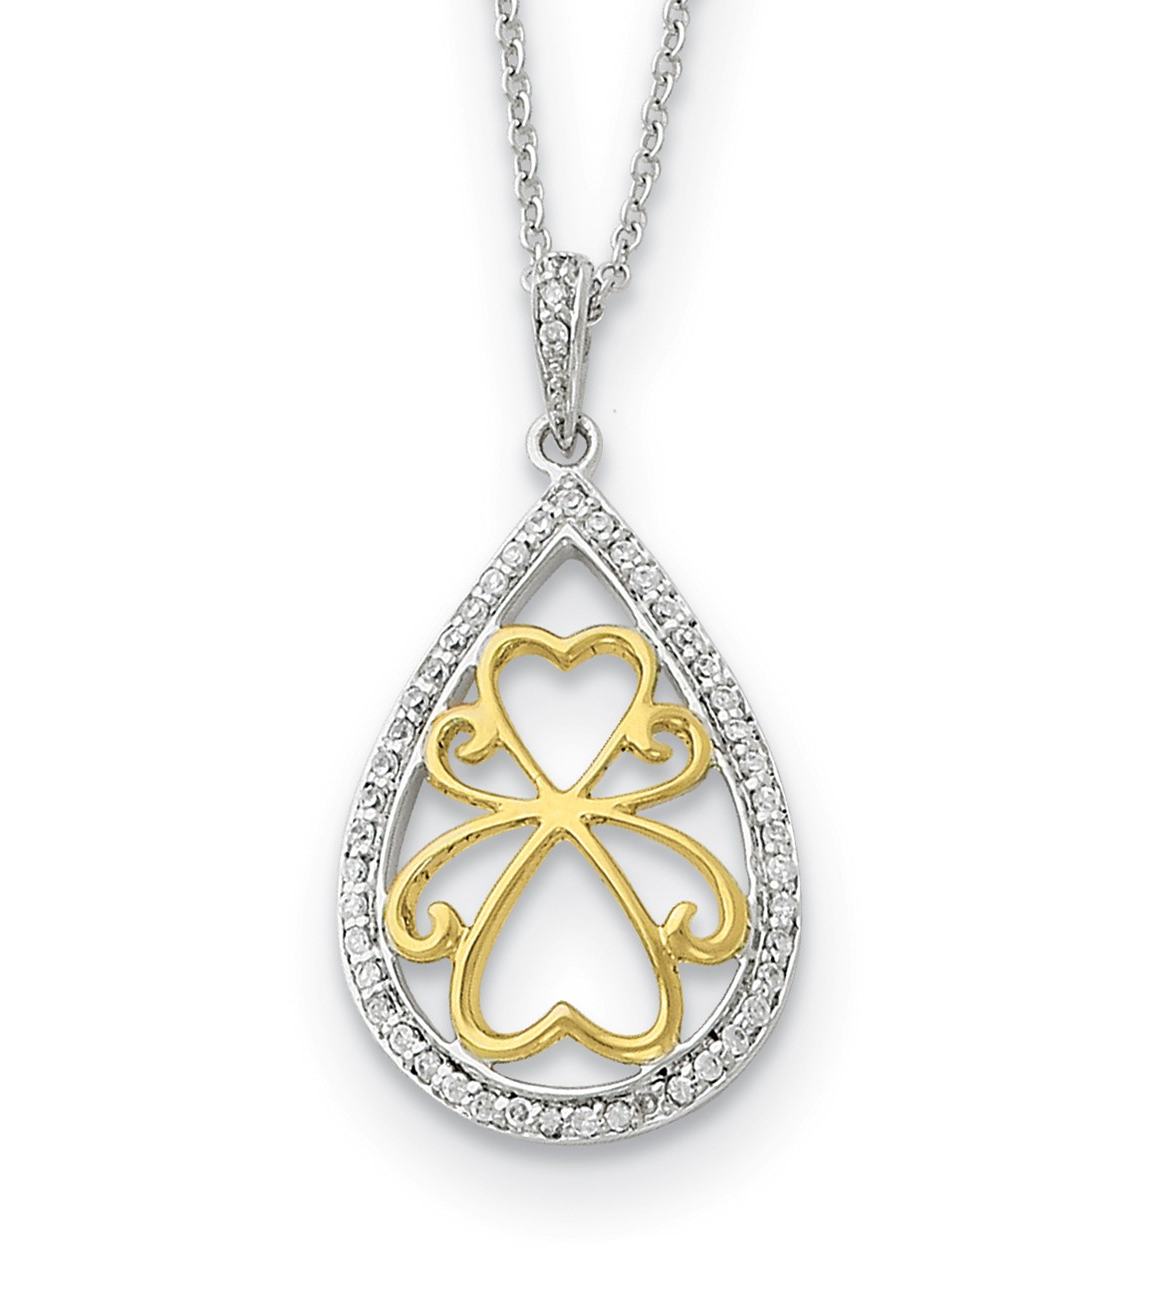 'Love Carries On' CZ Pendant Necklace, Rhodium-Plated Sterling Silver and Gold-Plate.